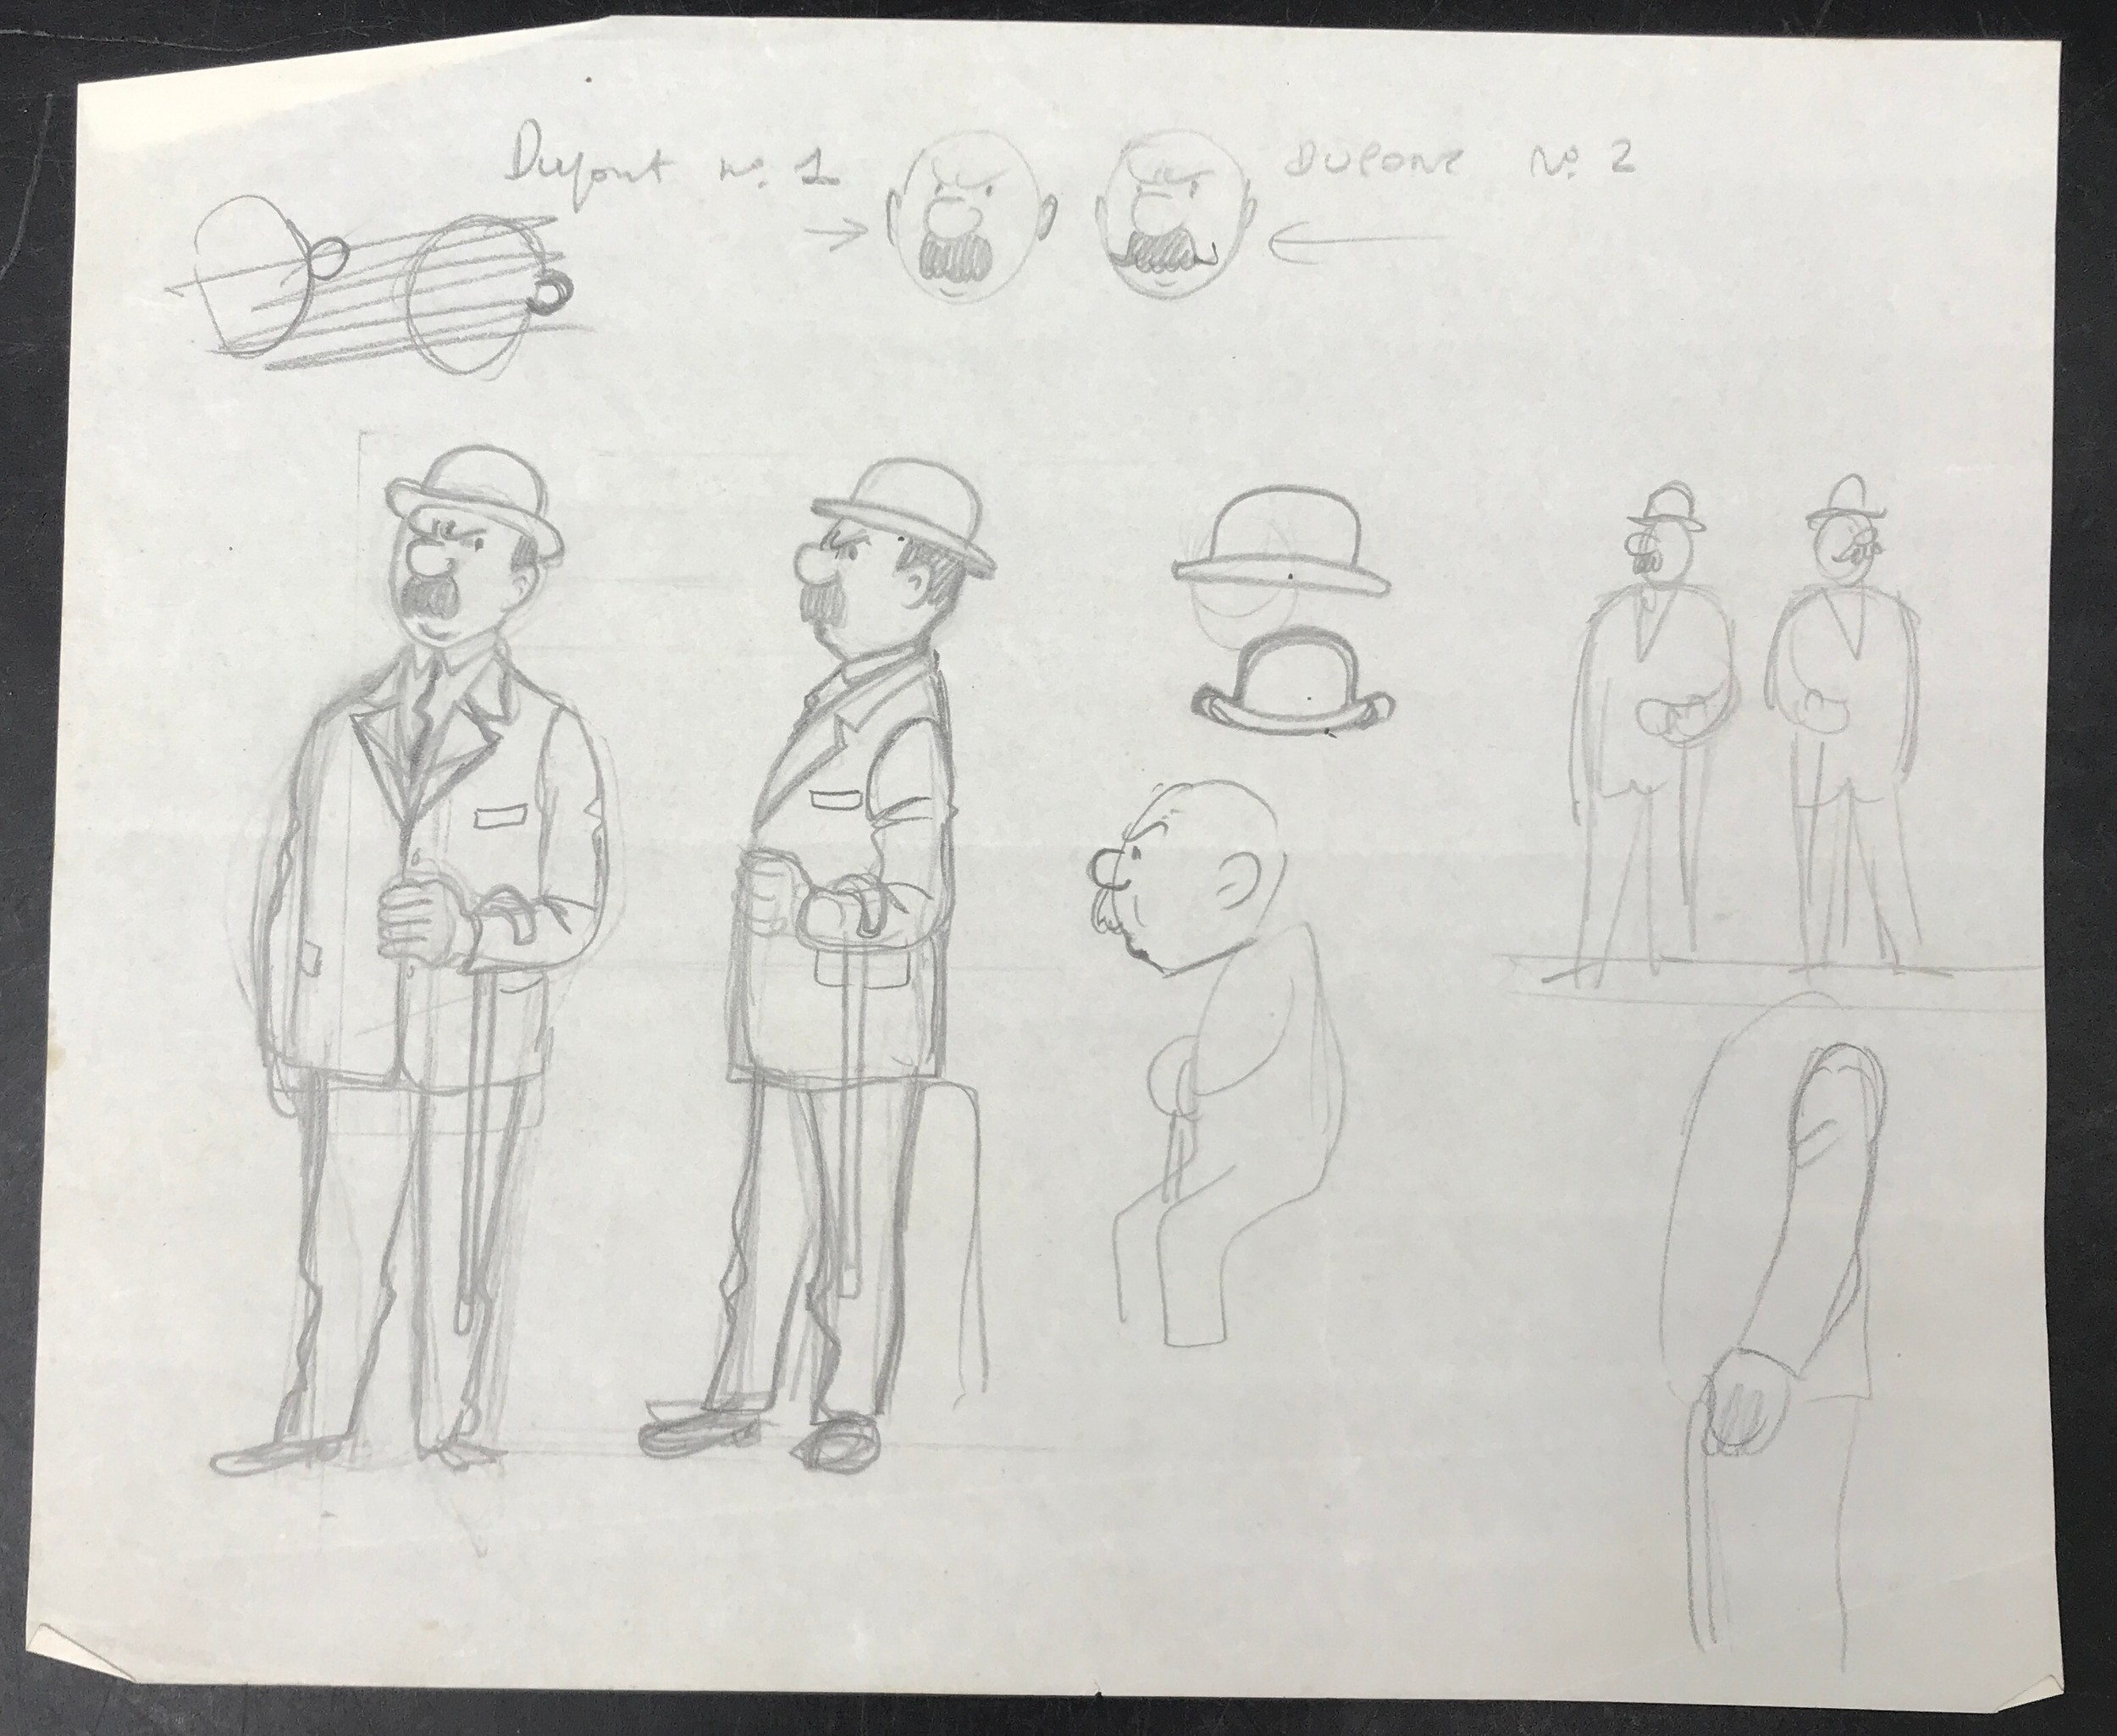 Hergé: Four original sketches by Belgium artist Hergé along with four comic books from the 40s and - Image 3 of 8